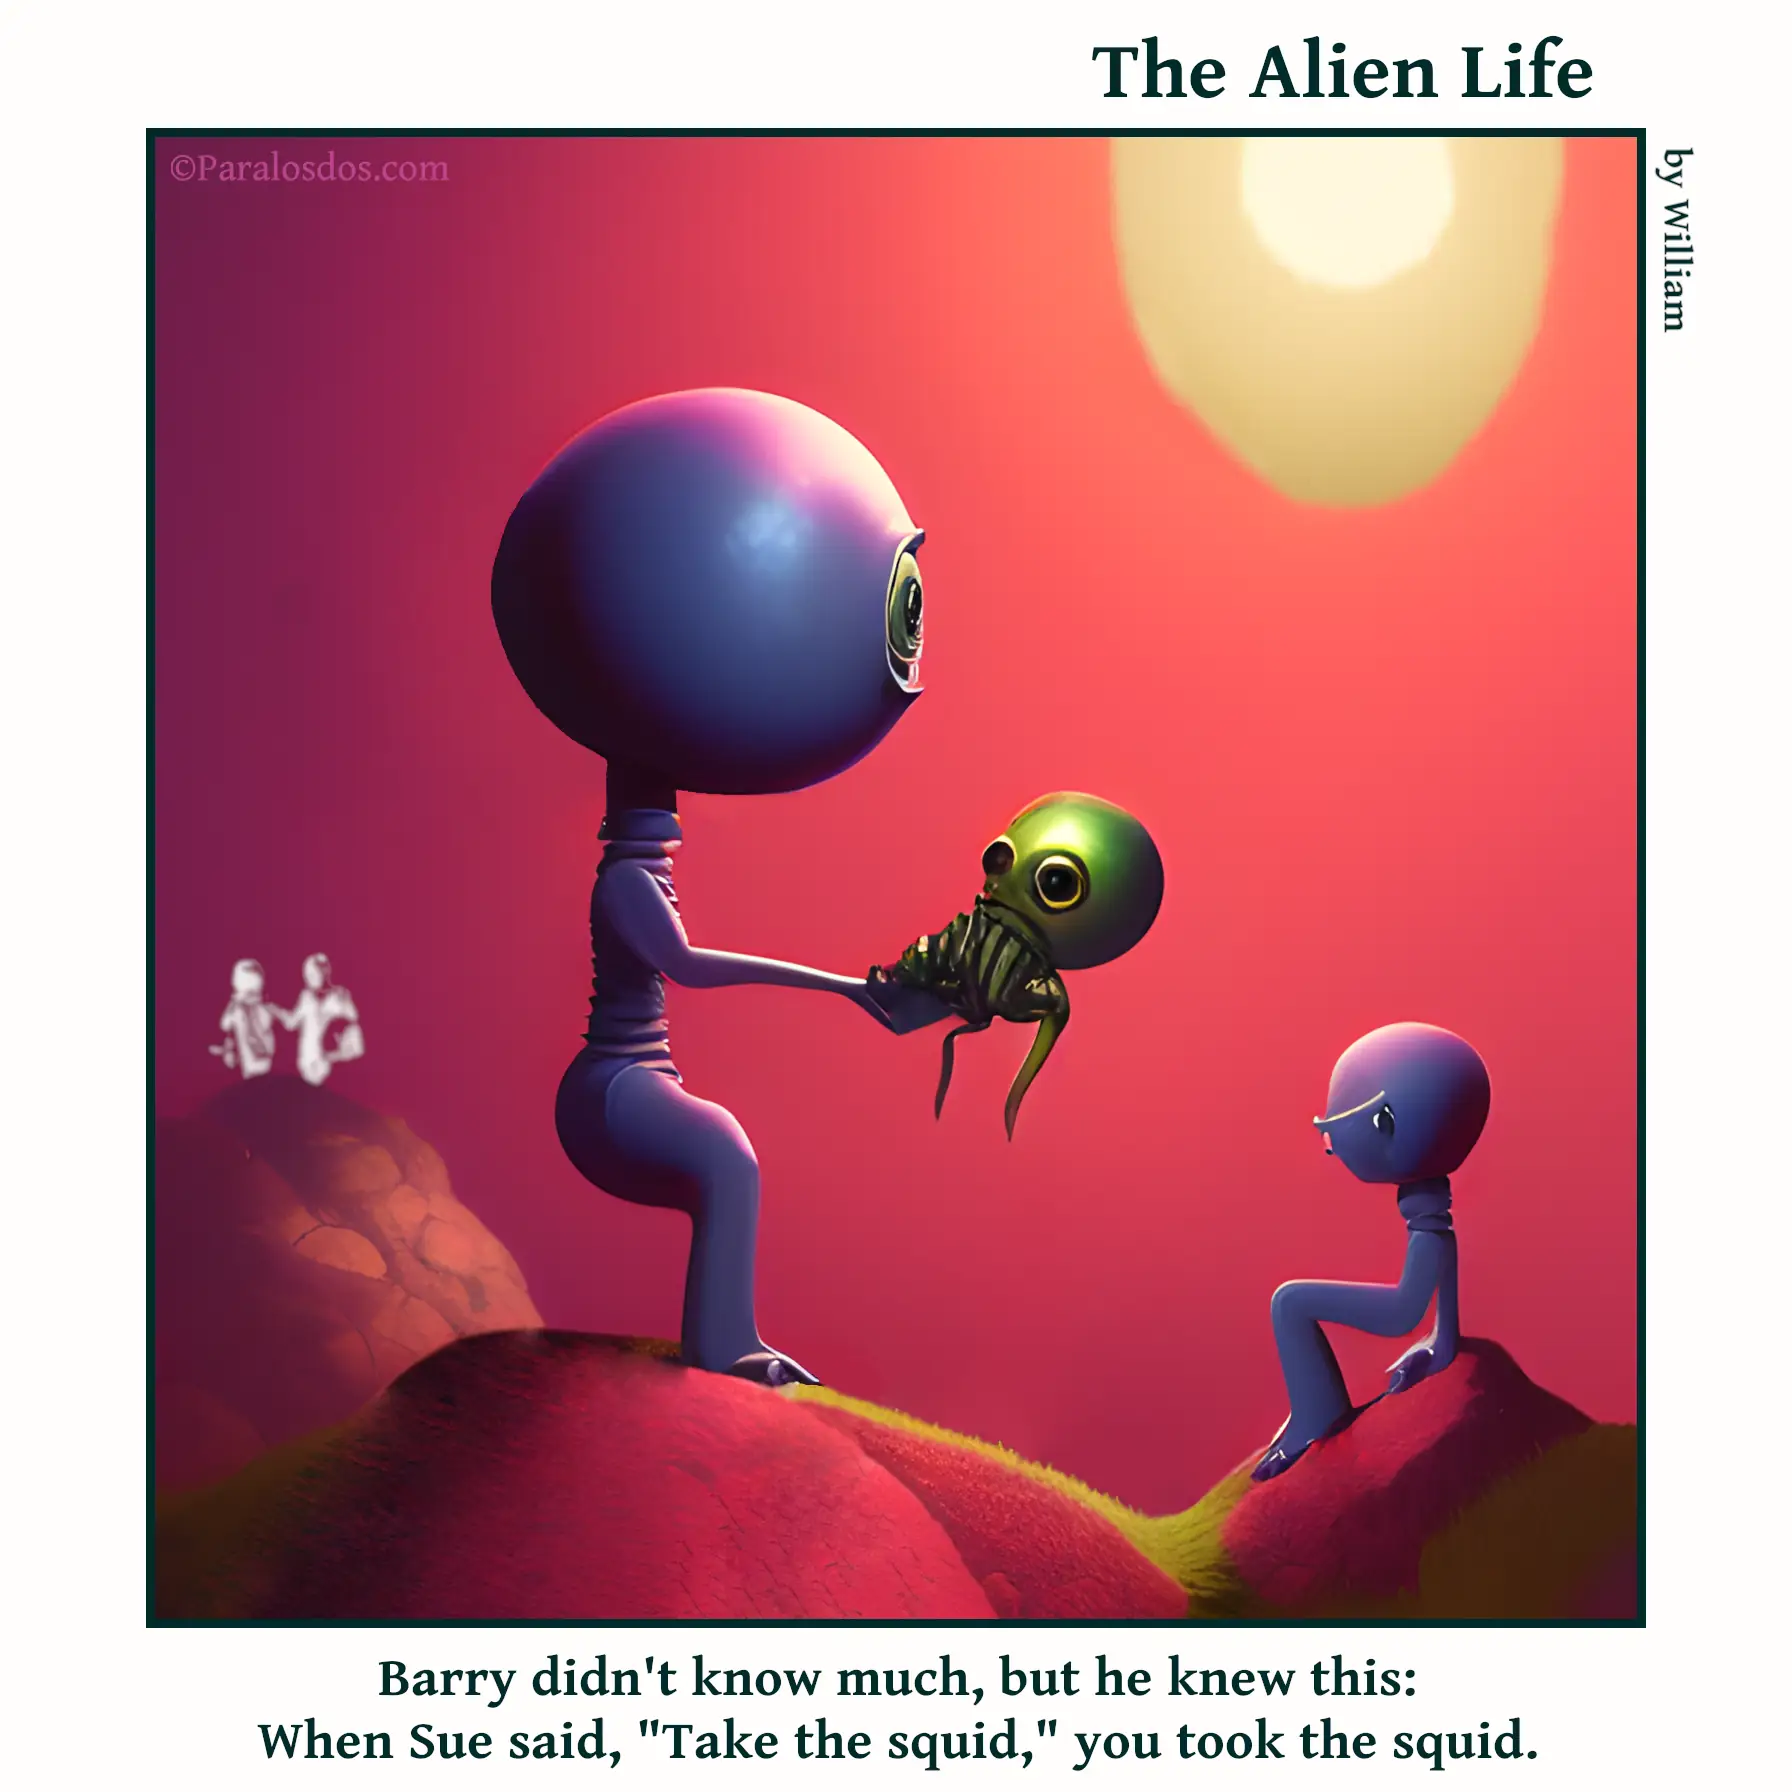 The Alien Life, one panel Comic. A giant alien is holding a squid in her hands, with her arms extended towards a little alien sitting on the ground. The caption reads: Barry didn't know much, but he knew this: When Sue said, "Take the squid," you took the squid.